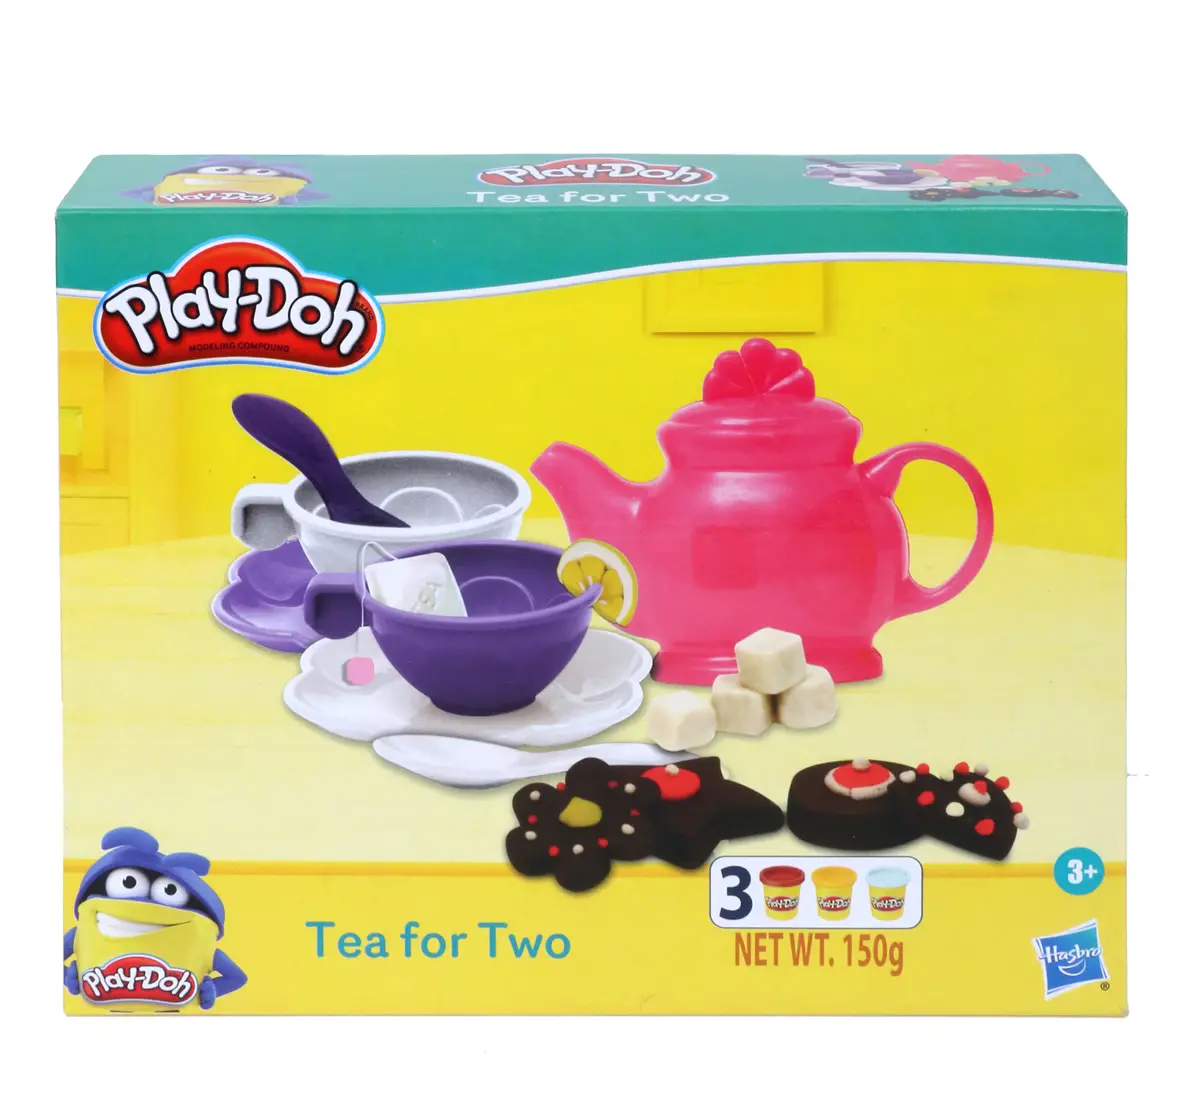 Play Doh Tea for Two Playset for Kids 3Y+, Multicolour